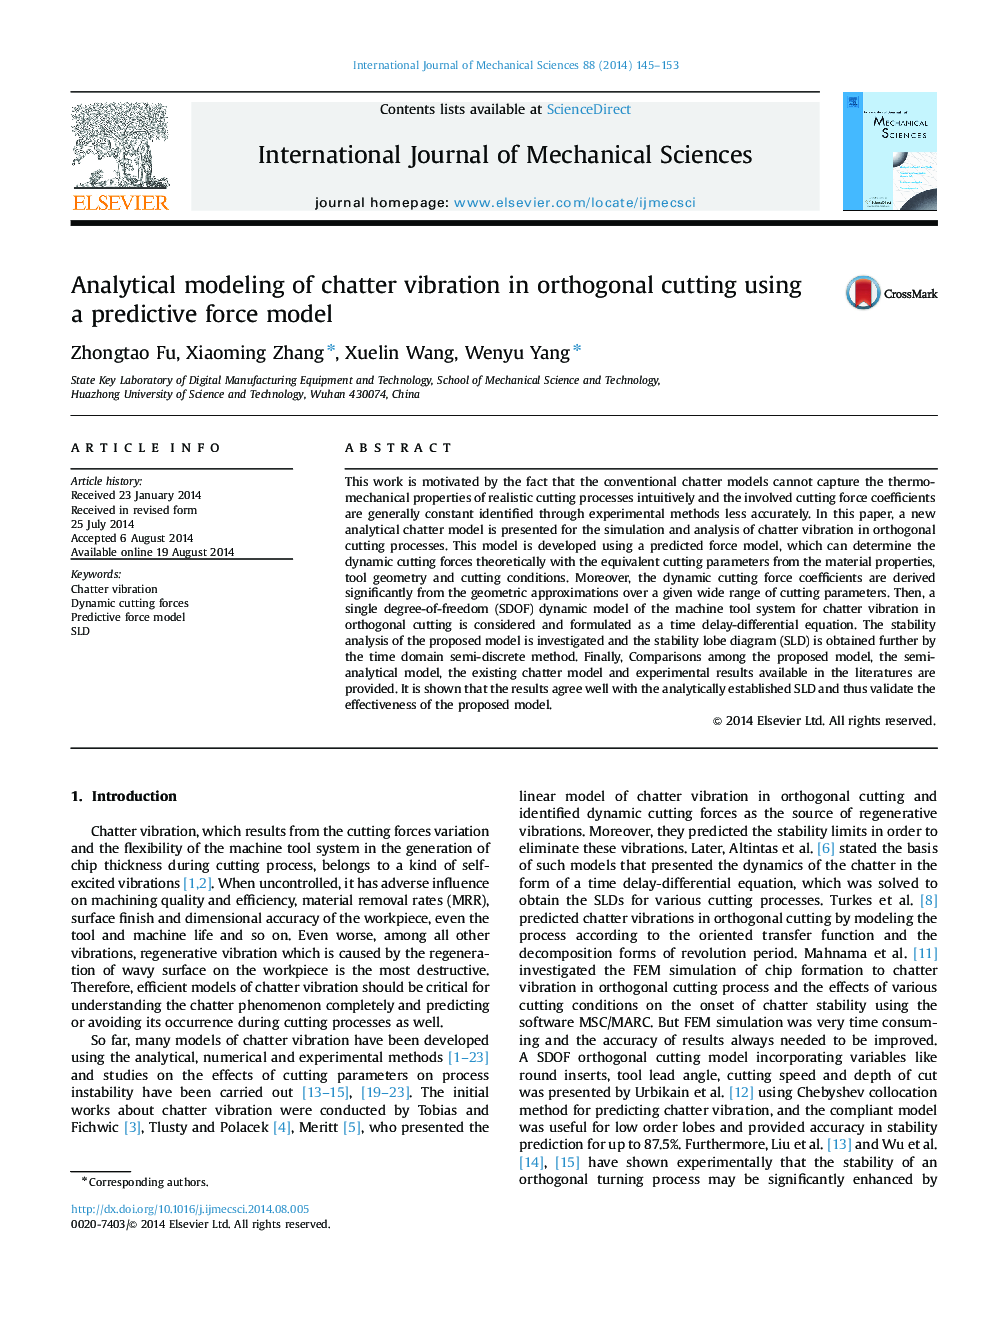 Analytical modeling of chatter vibration in orthogonal cutting using a predictive force model